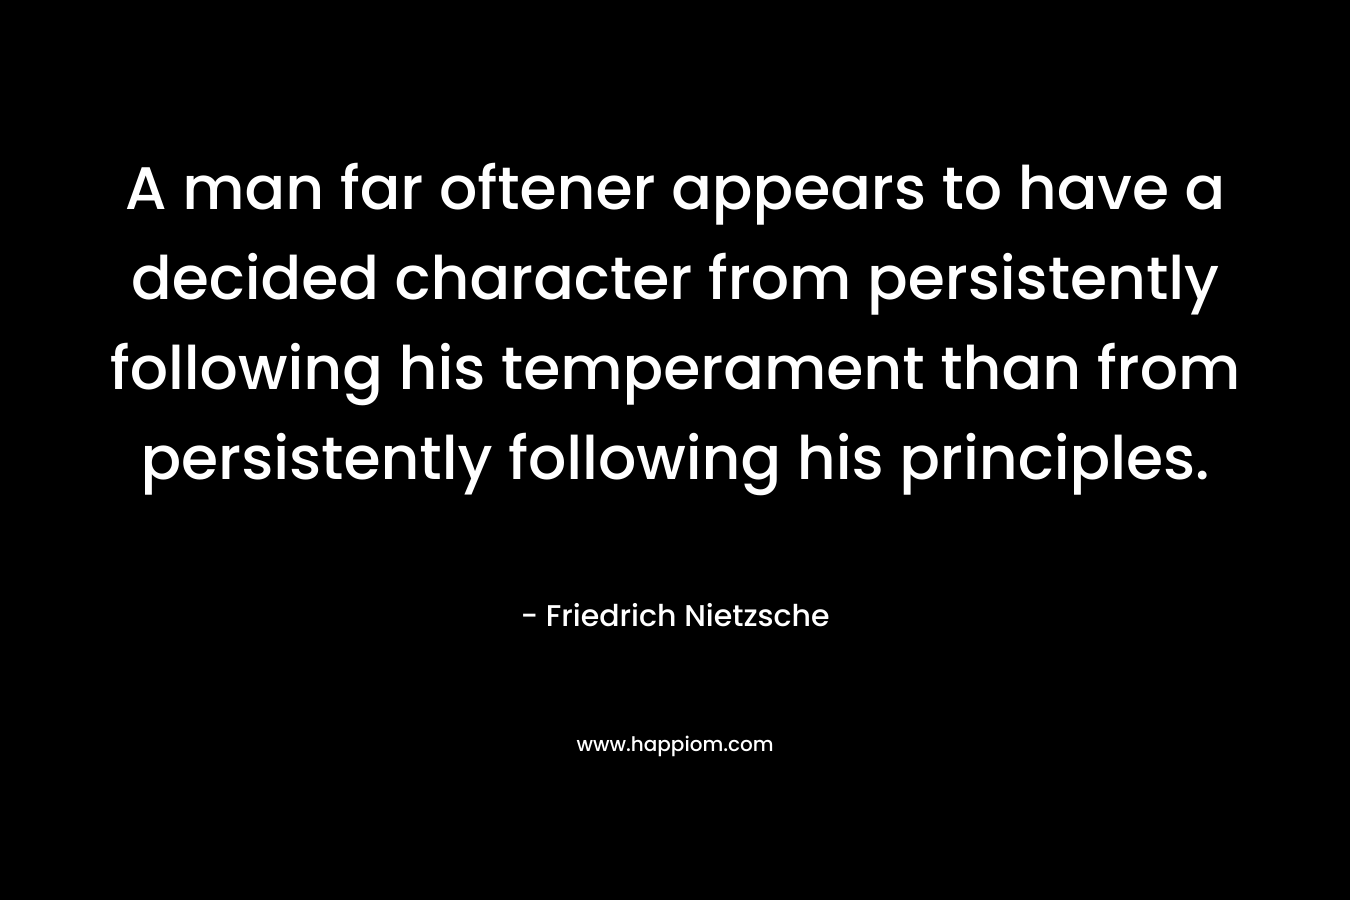 A man far oftener appears to have a decided character from persistently following his temperament than from persistently following his principles. – Friedrich Nietzsche